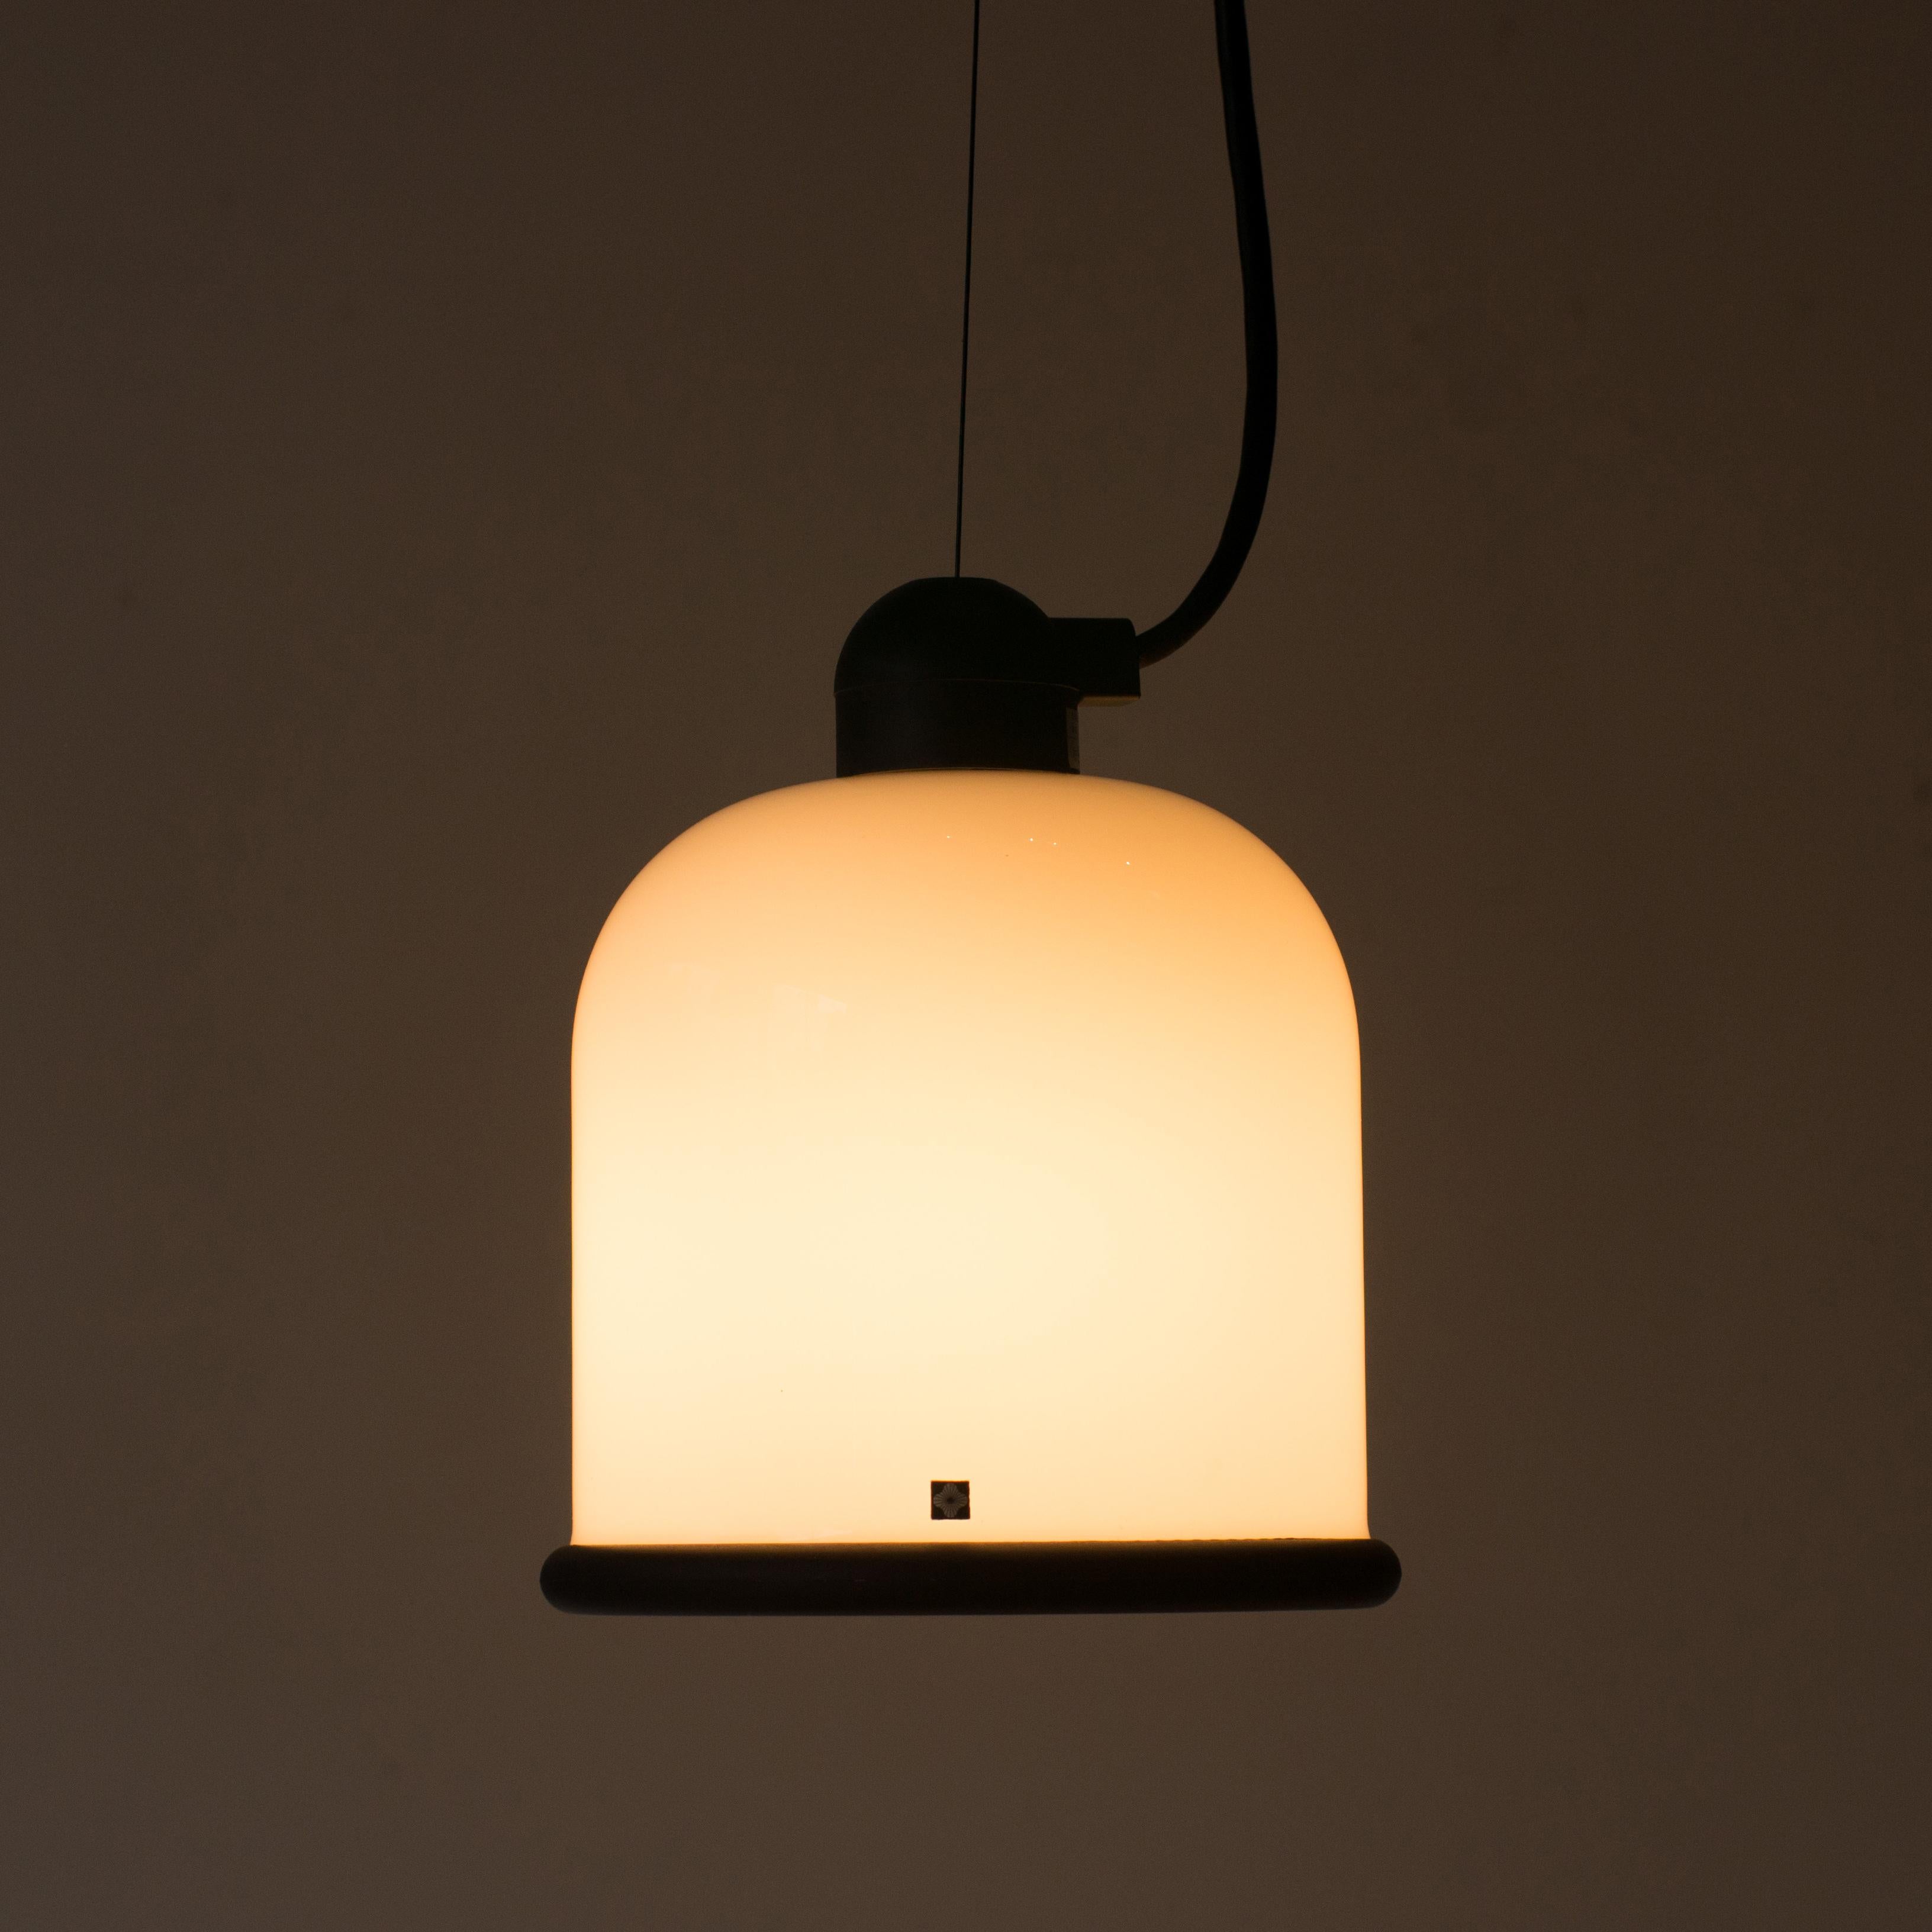 Domani pendant lamp designed by Masayuki Kurokawa for Yamagiwa. Made of glass with rubber lim. Half transparent glass shade in white.
This is small model. Also, we have large one in stock.